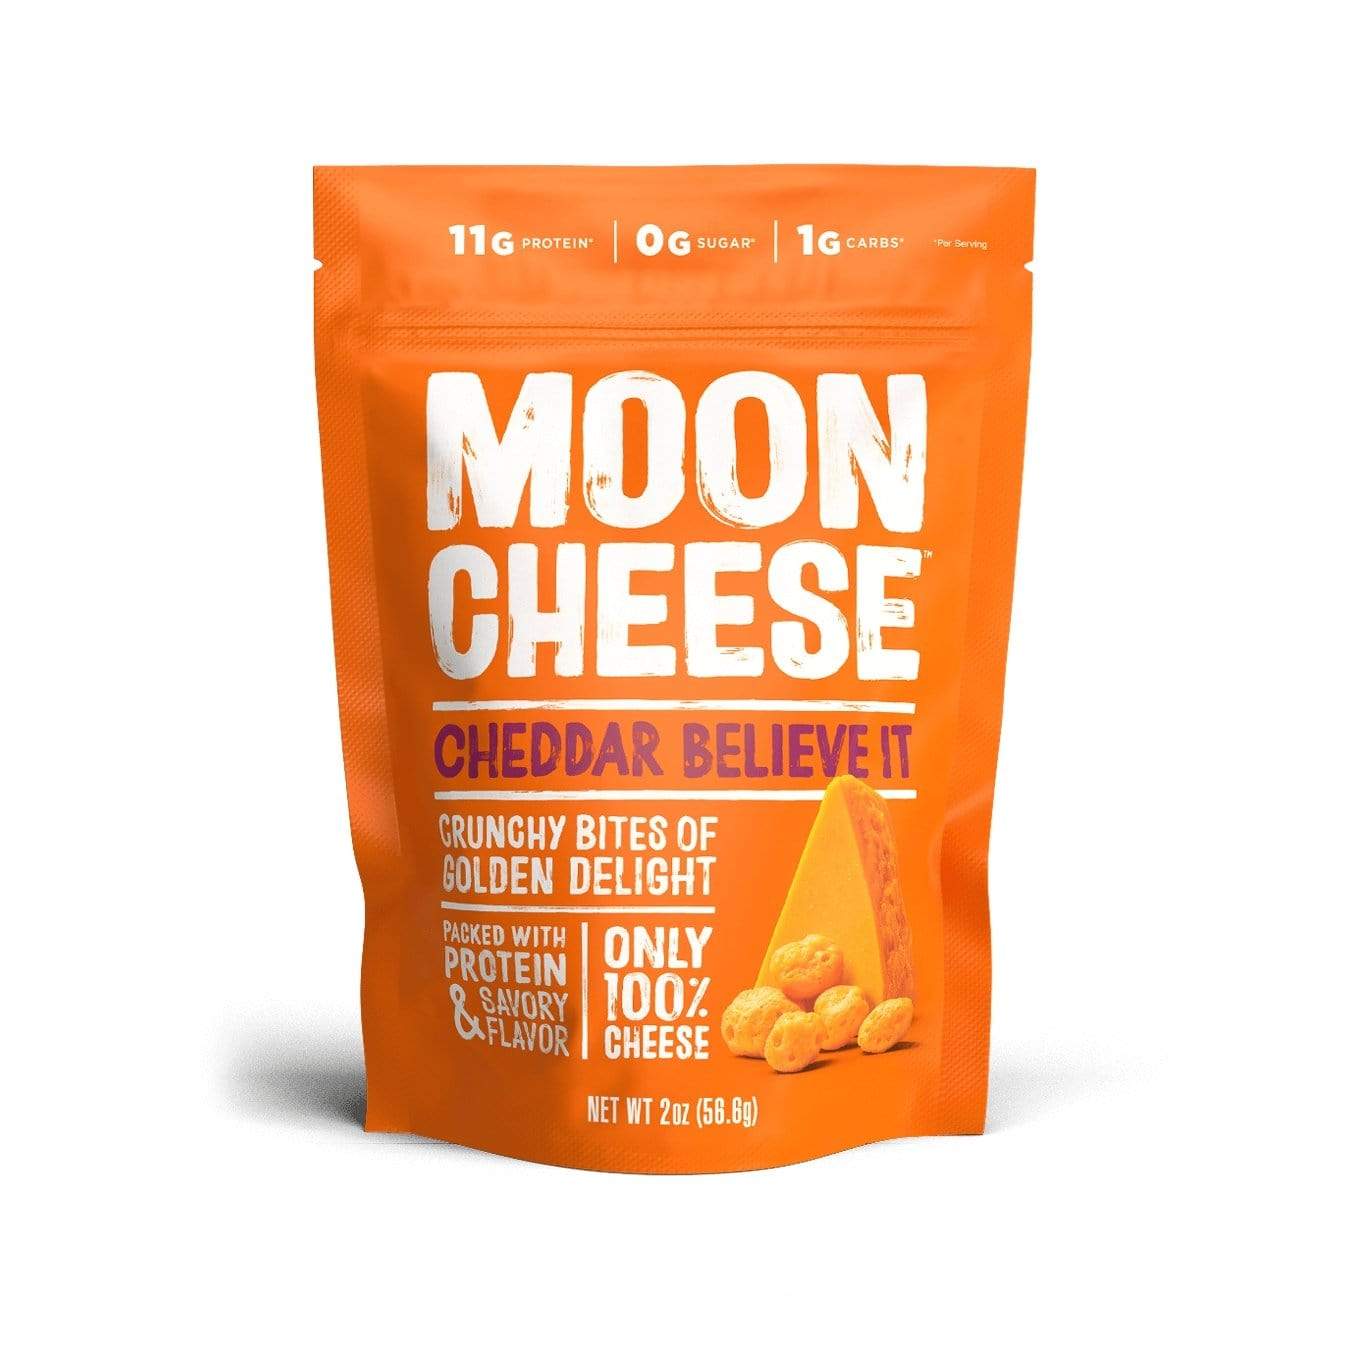 [Moon Cheese] Cheddar Believe It I 1oz or 2 oz bags exclusive at